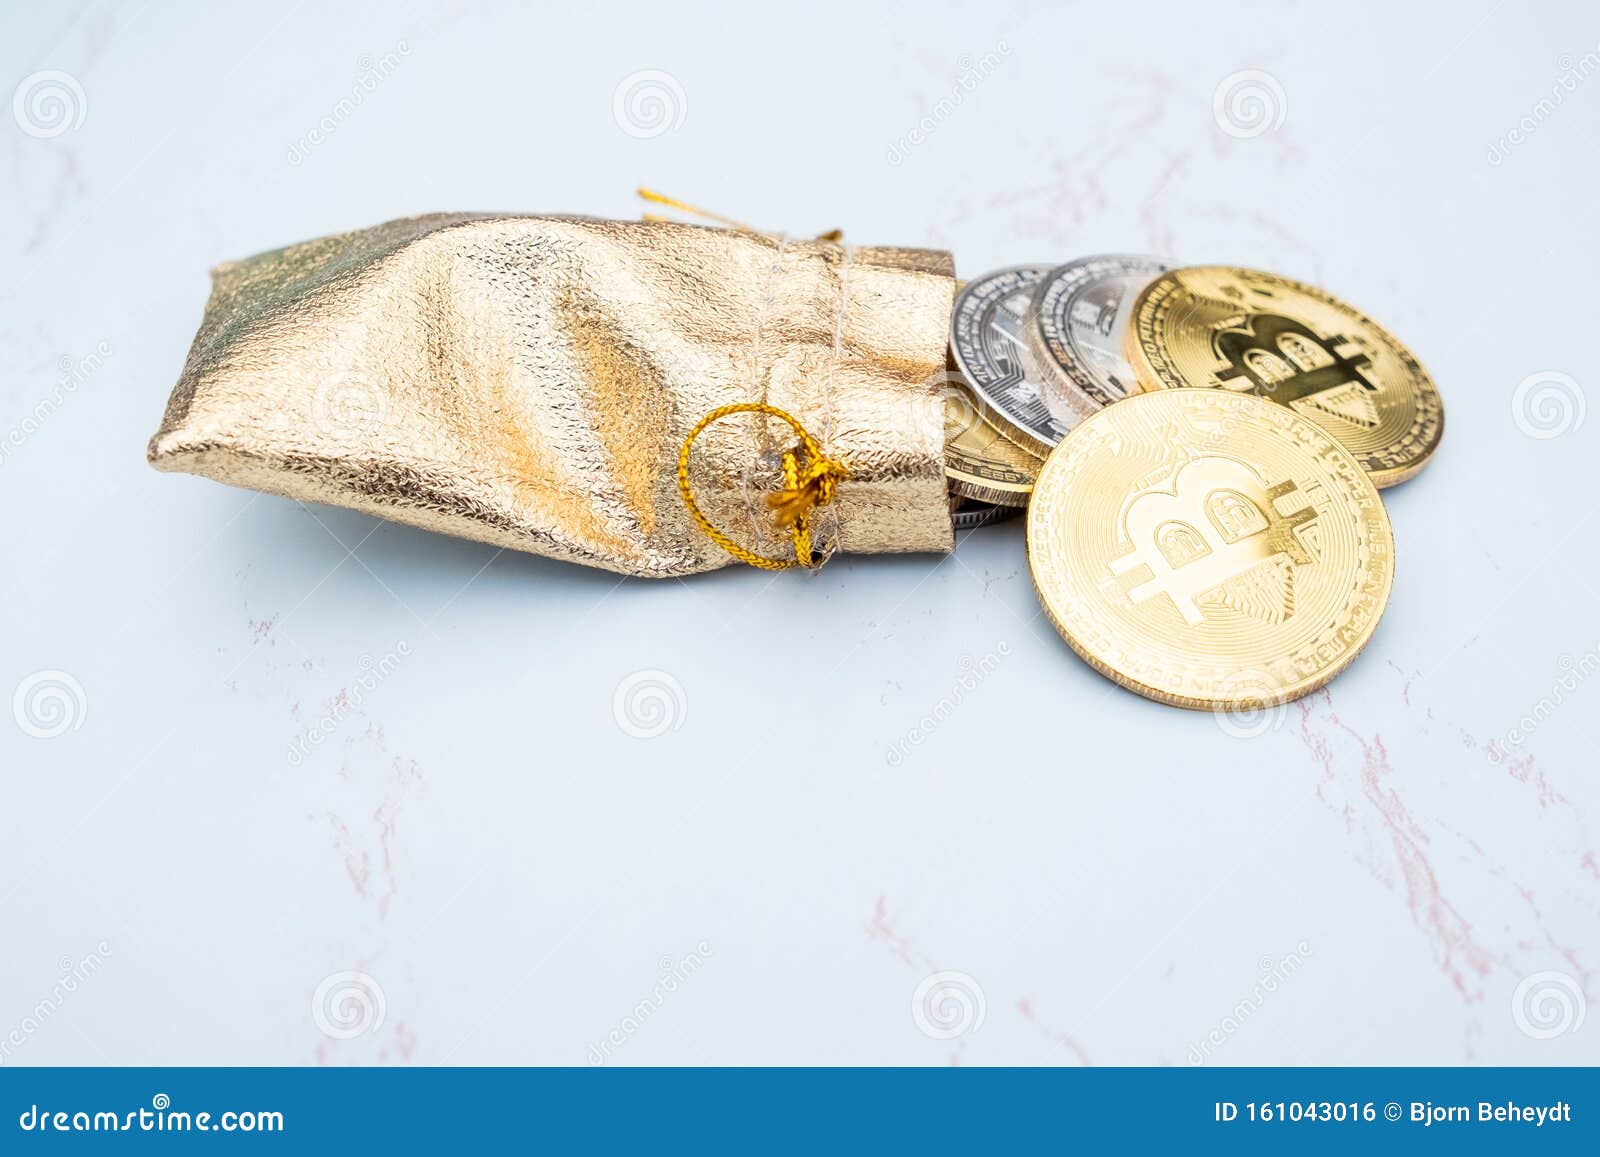 Bunch Of Crypto Currency Coins In A Golden Moneybag With ...